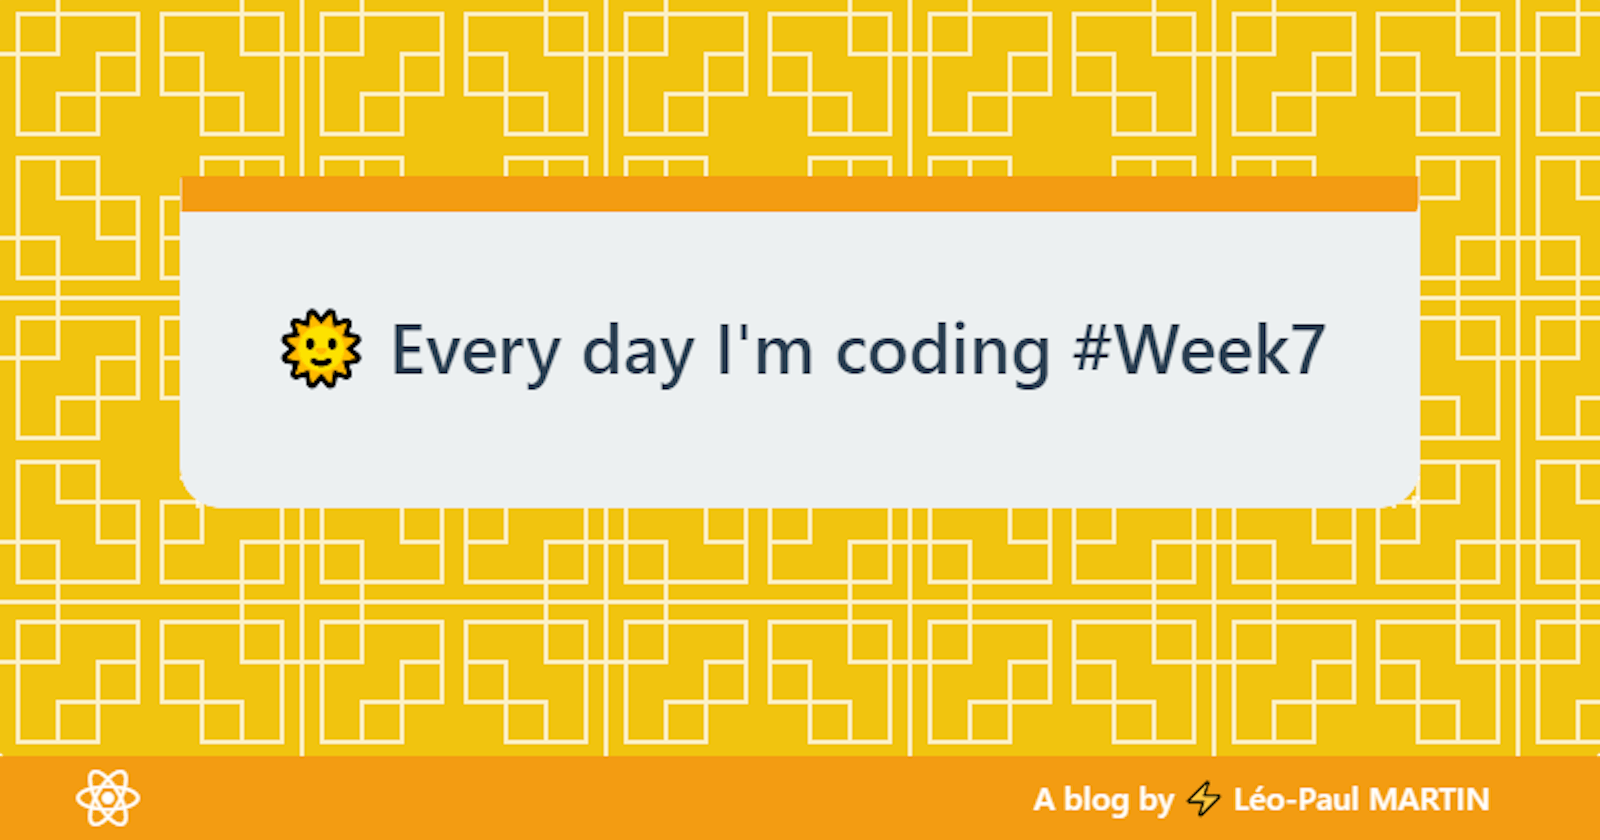 🌞 Every day I'm coding #Week7